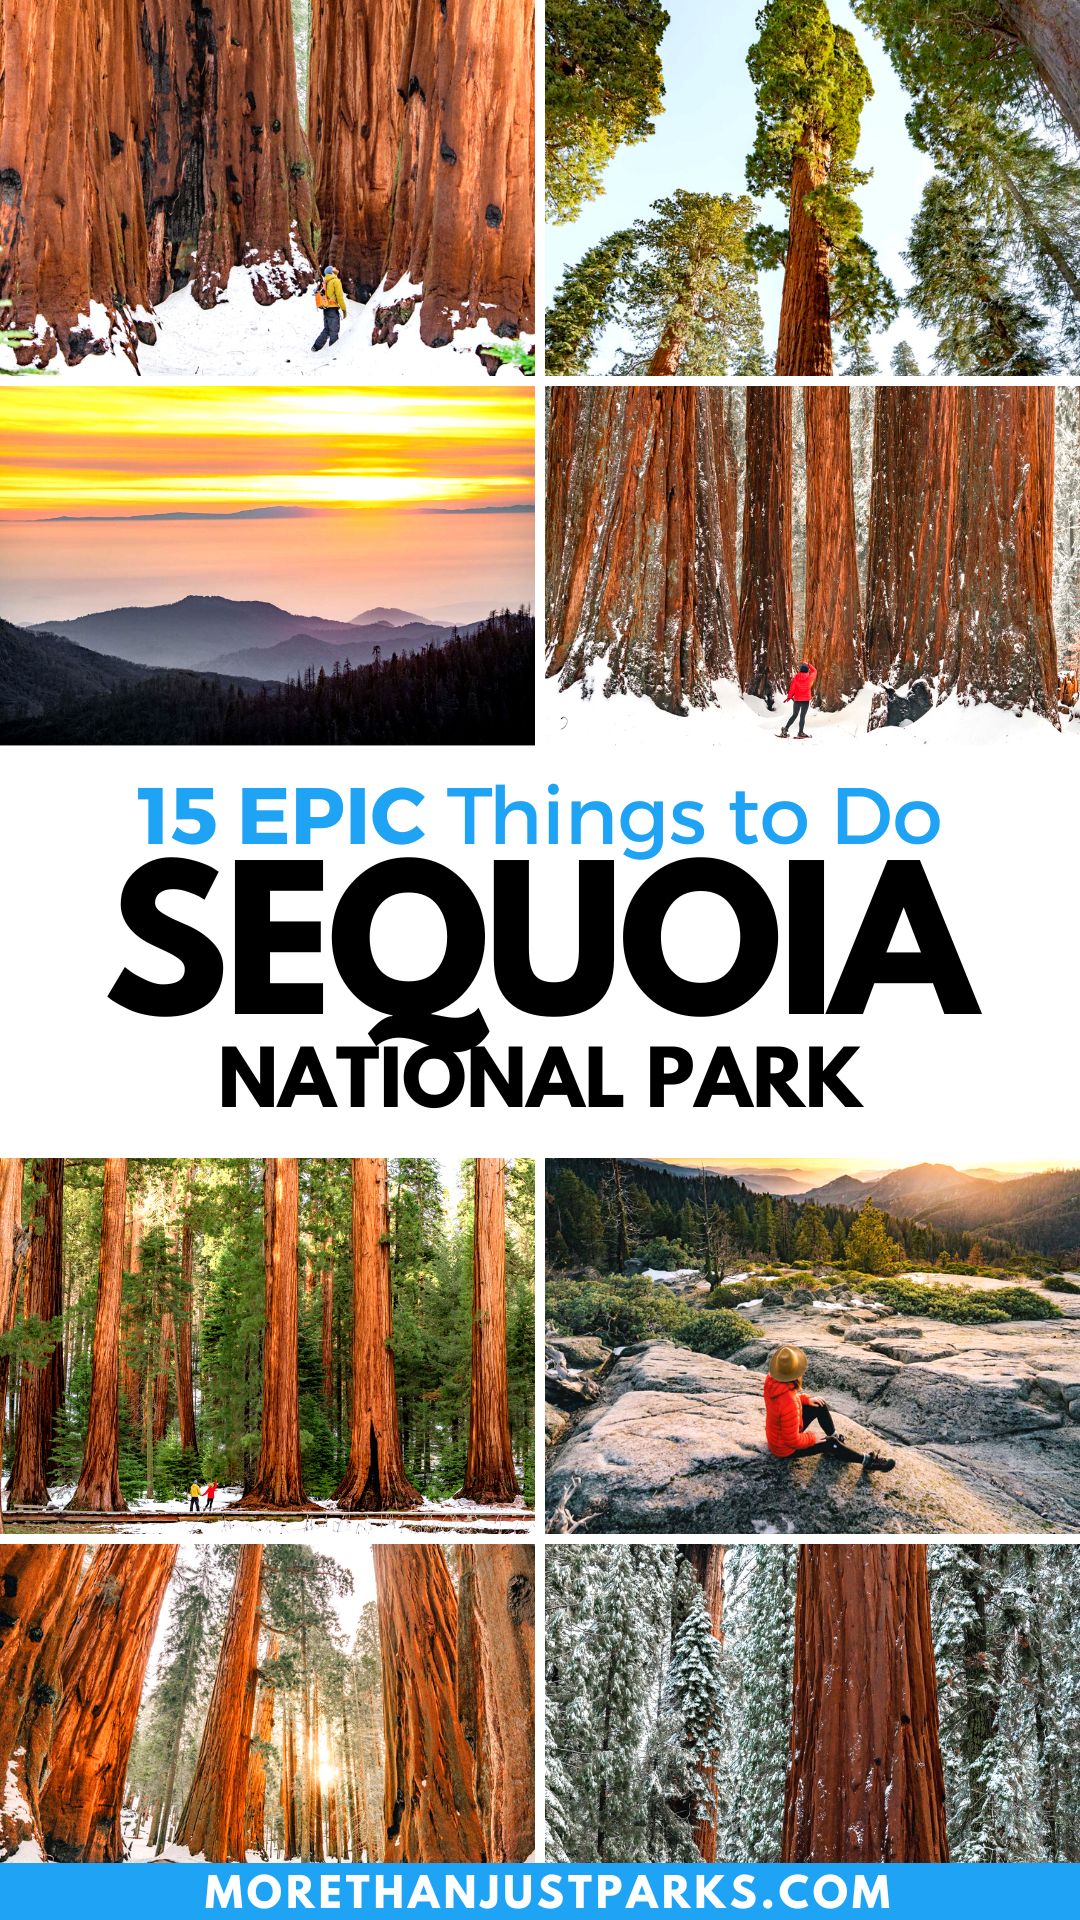 things to do sequoia national park, sequoia national park activities, sequoia california